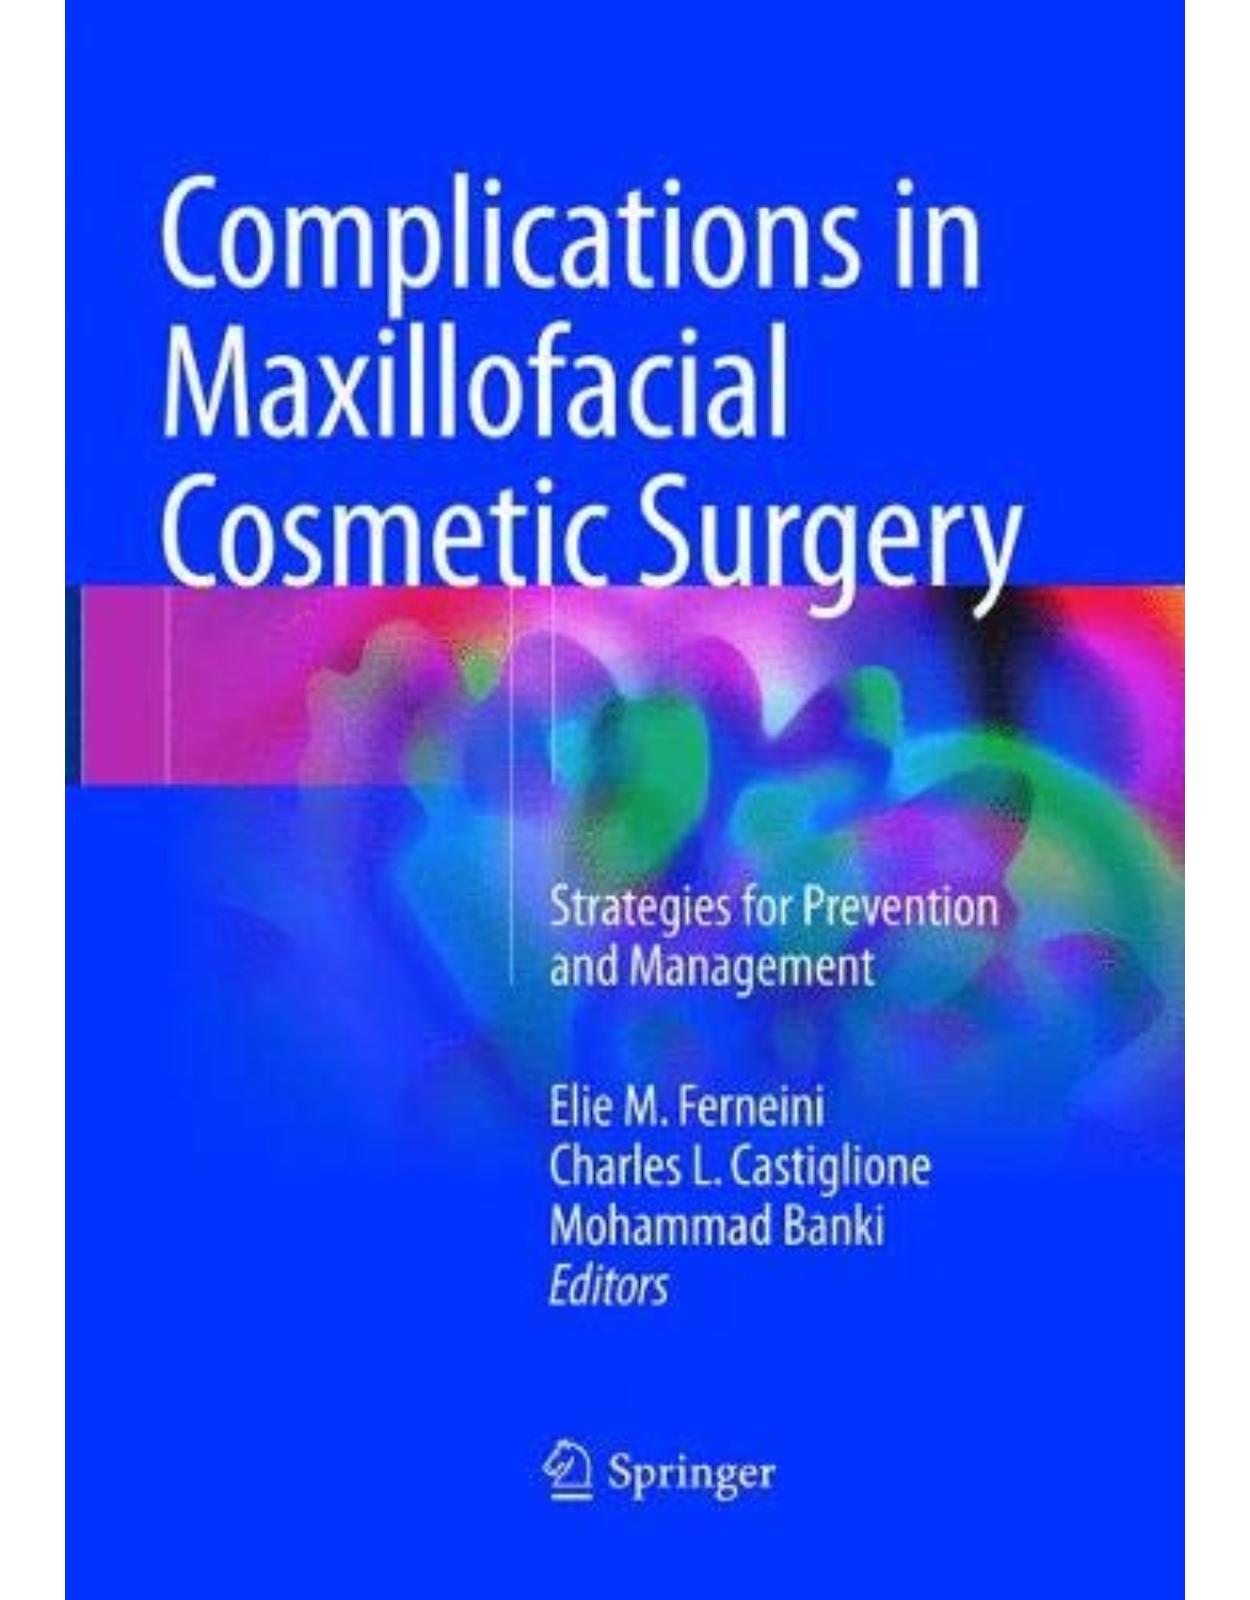 Complications in Maxillofacial Cosmetic Surgery: Strategies for Prevention and Management